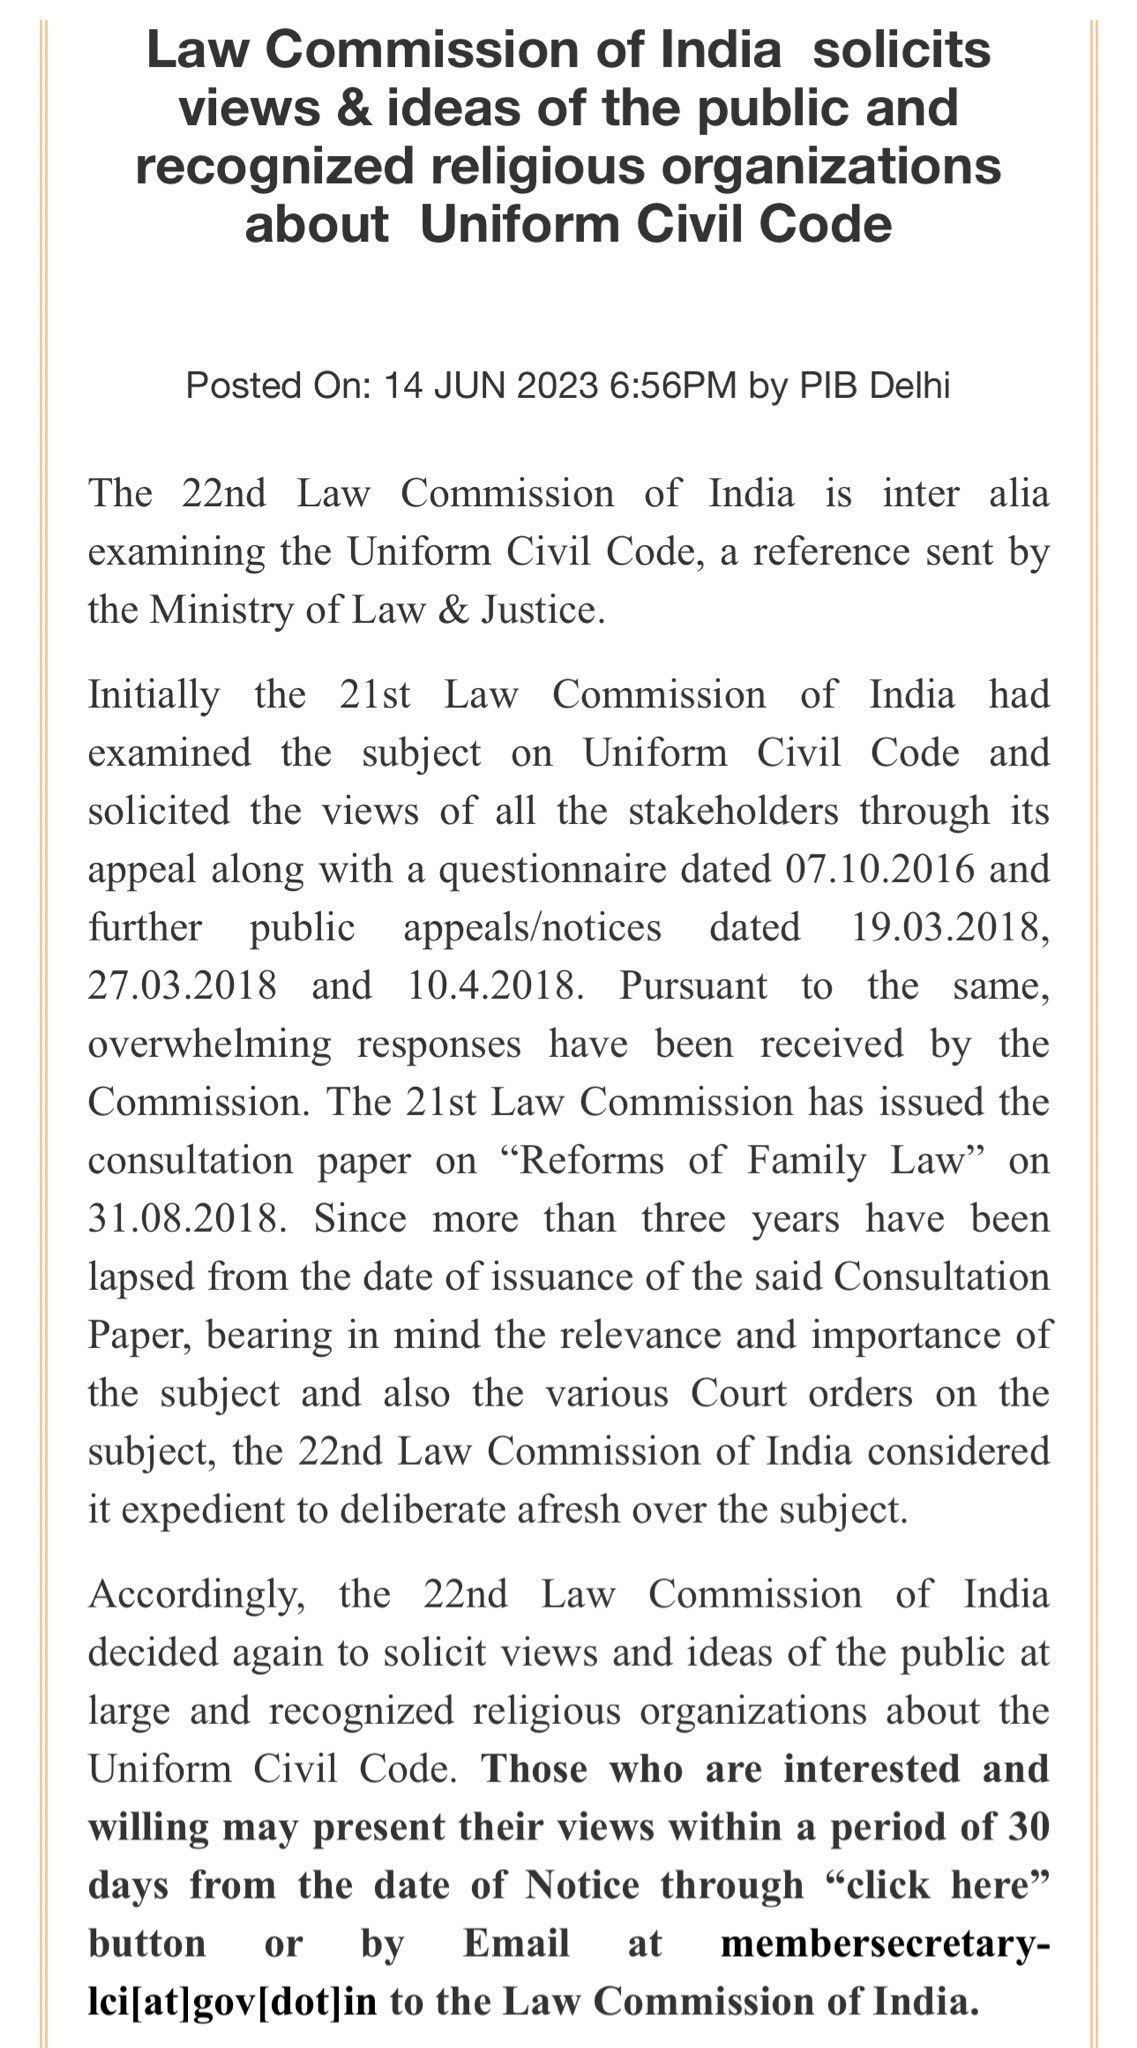 Image Law Commission of India issued notice to send suggestions on UCC